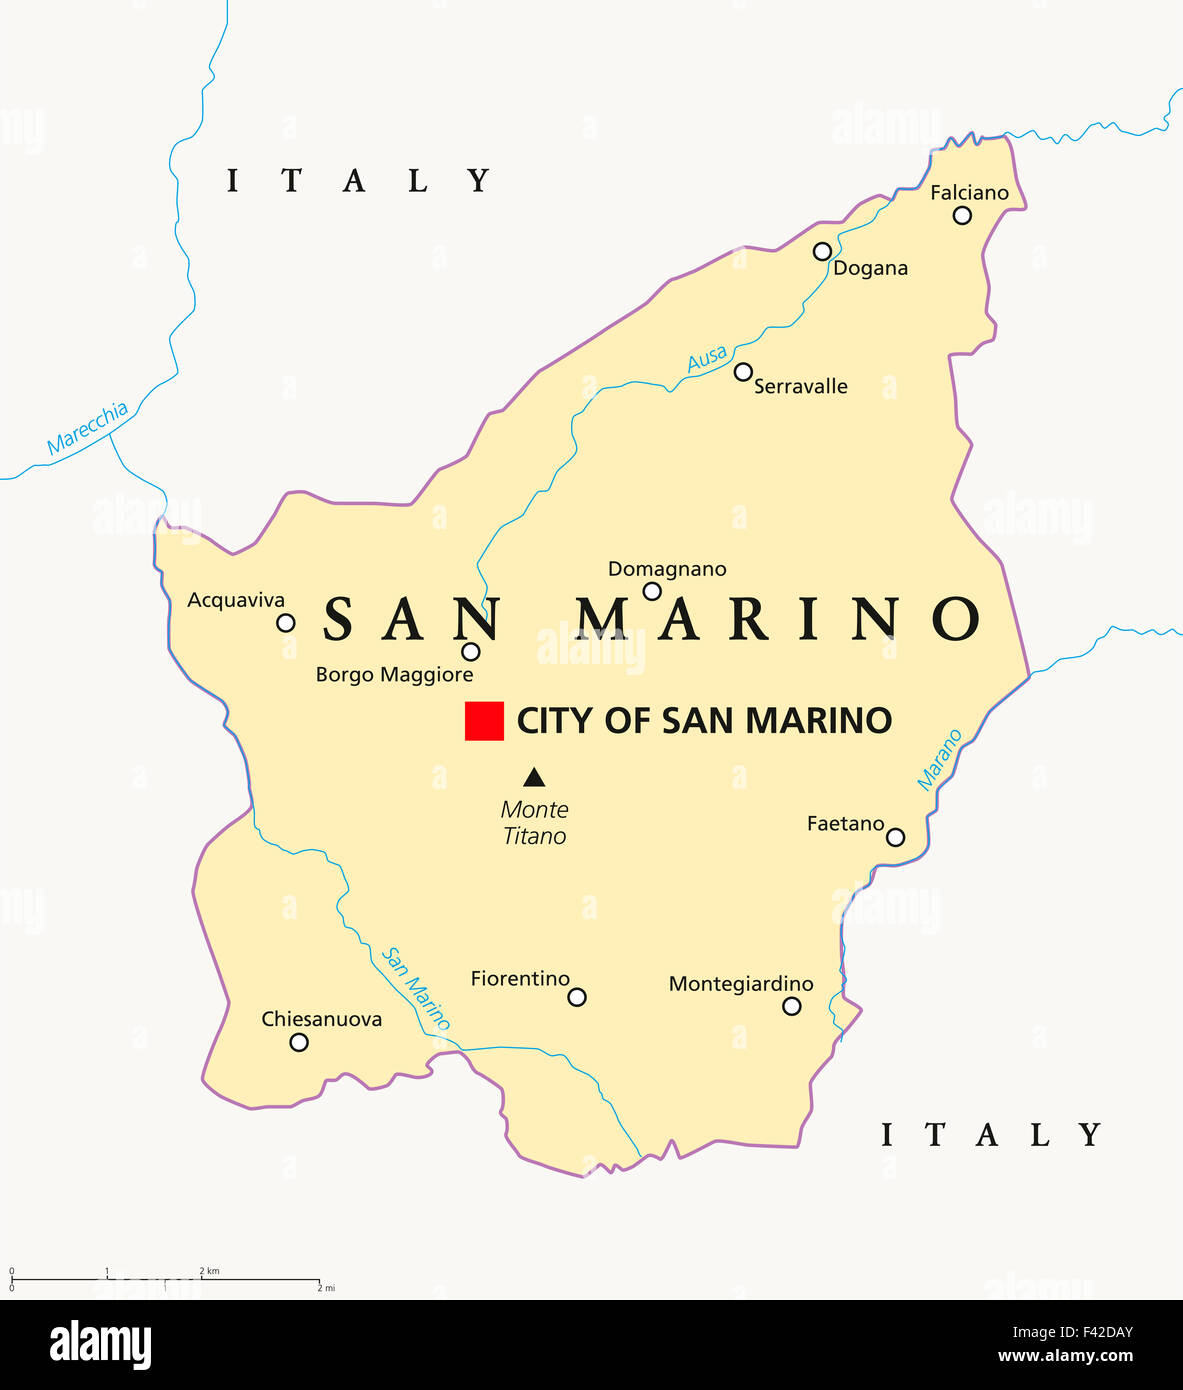 San Marino political map with capital City of San Marino, national borders, important towns and rivers. English labeling. Stock Photo